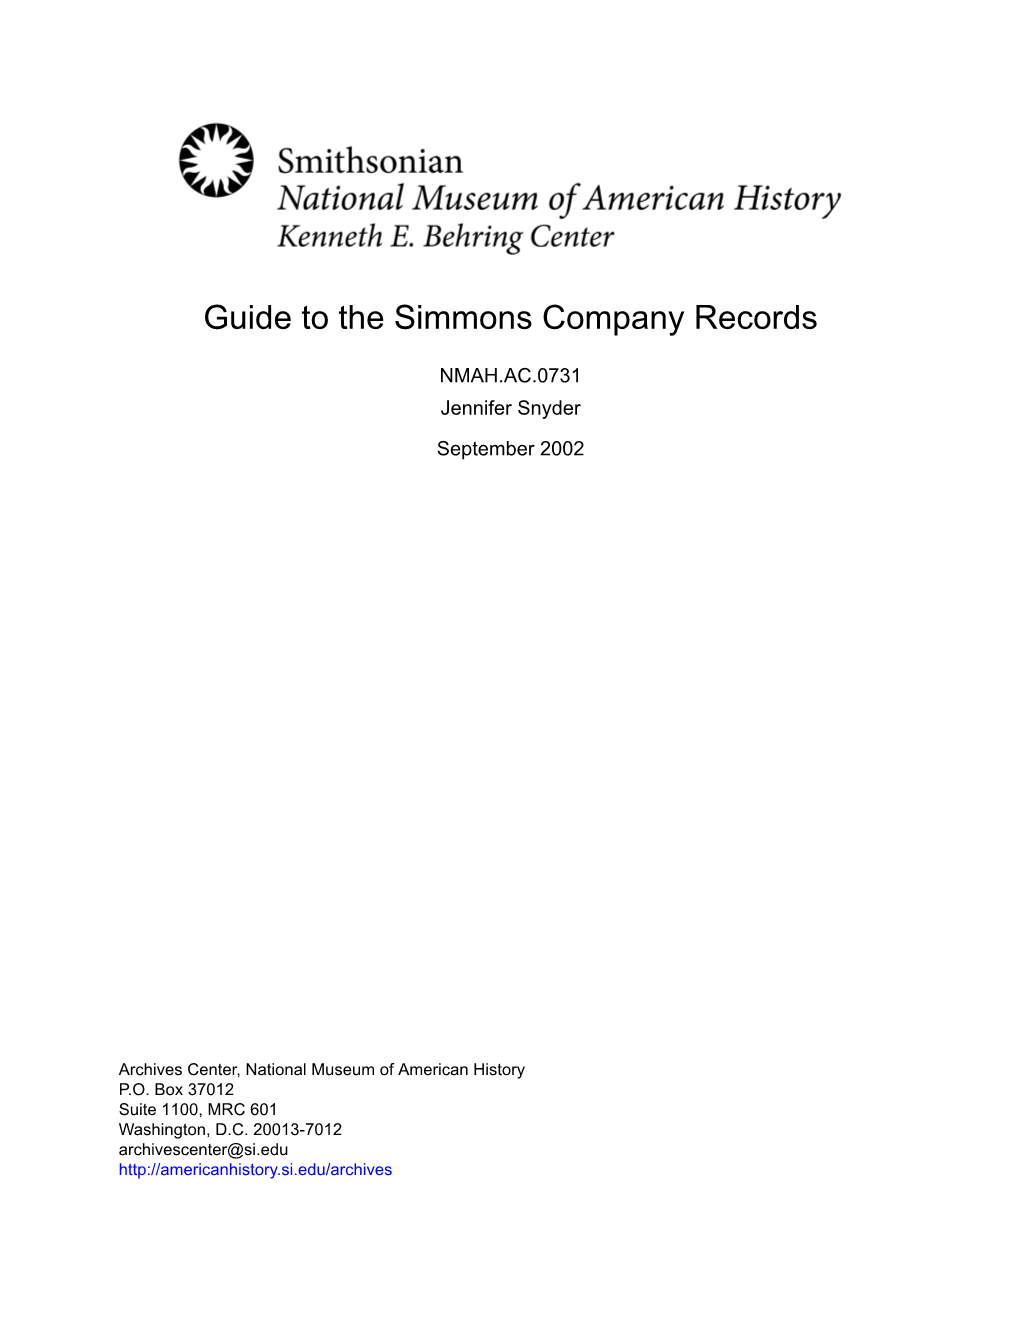 Guide to the Simmons Company Records